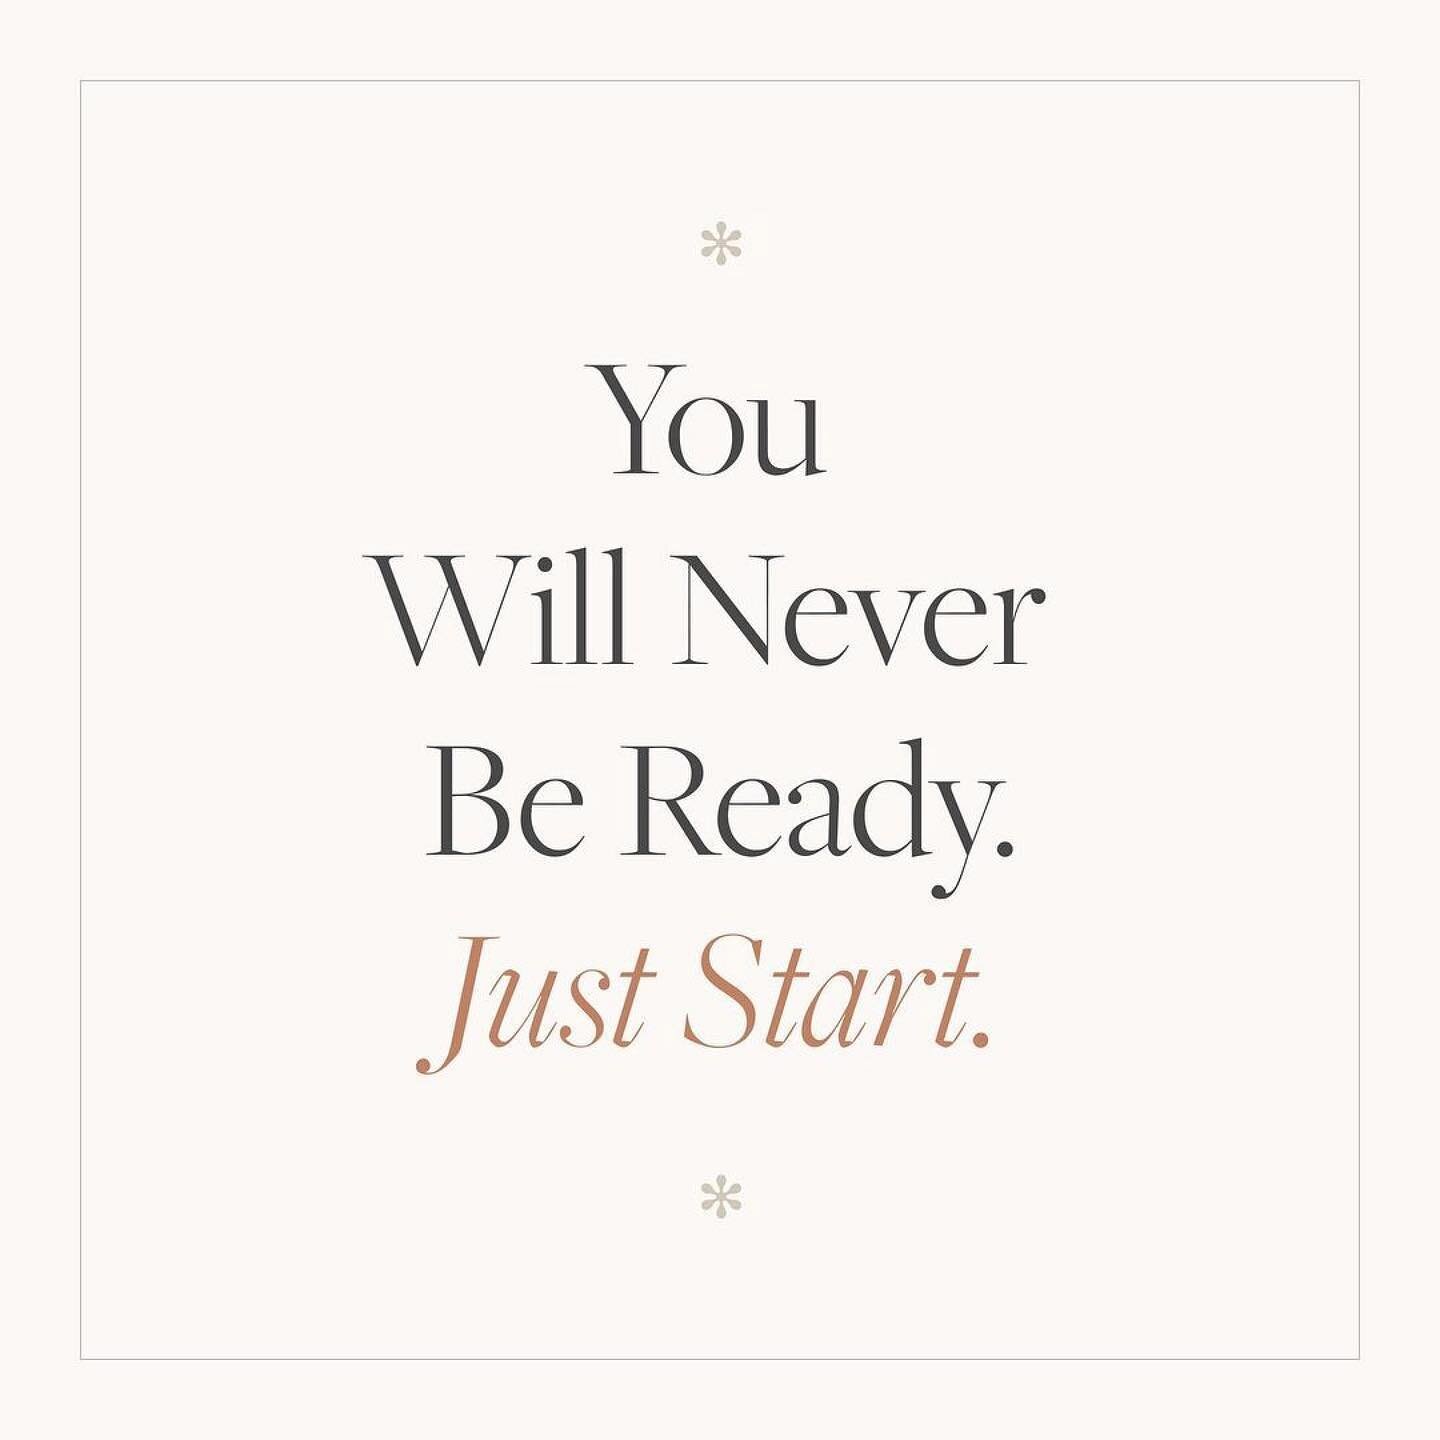 You will never be ready. Just start 💪